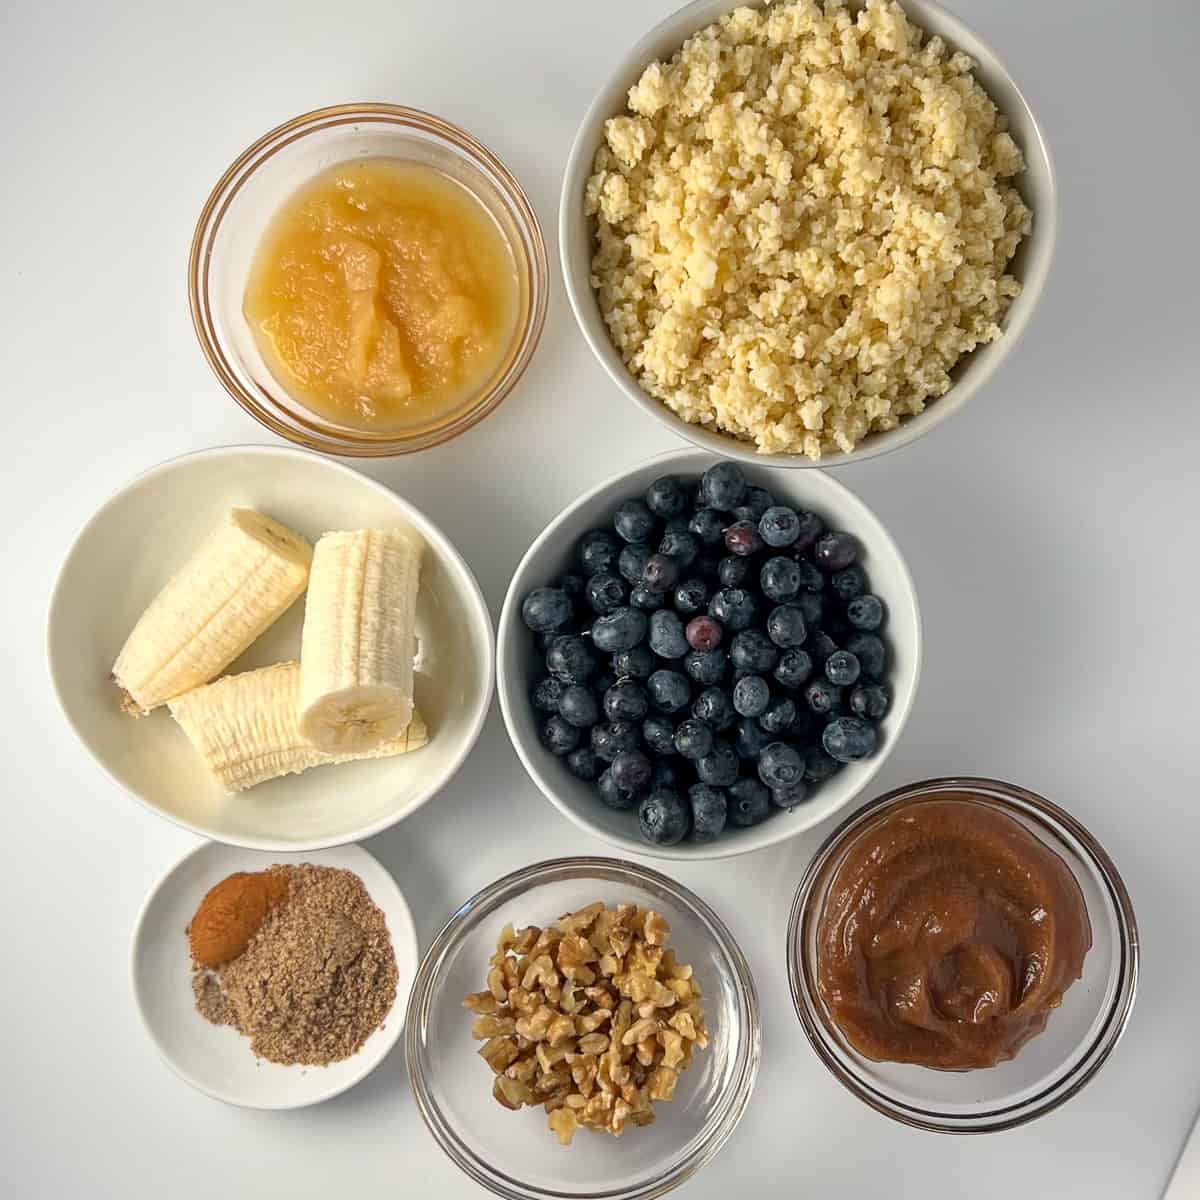 top view of the ingredients for flourless millet muffins: unsweetened apple sauce, millet (cook and cooled), banana, fresh blueberries, ground flaxseeds, cinnamon, cardamom, simple homemade date syrup, chopped walnuts